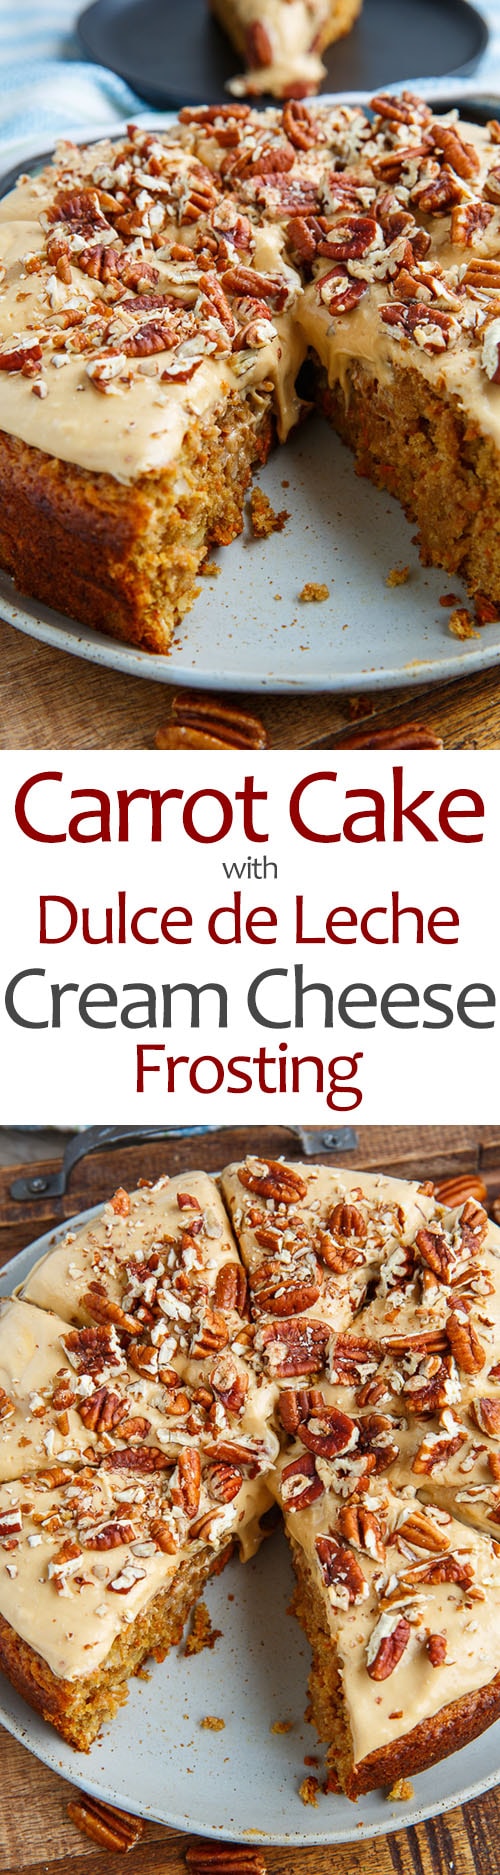 Carrot Cake with Dulce de Leche Cream Cheese Frosting